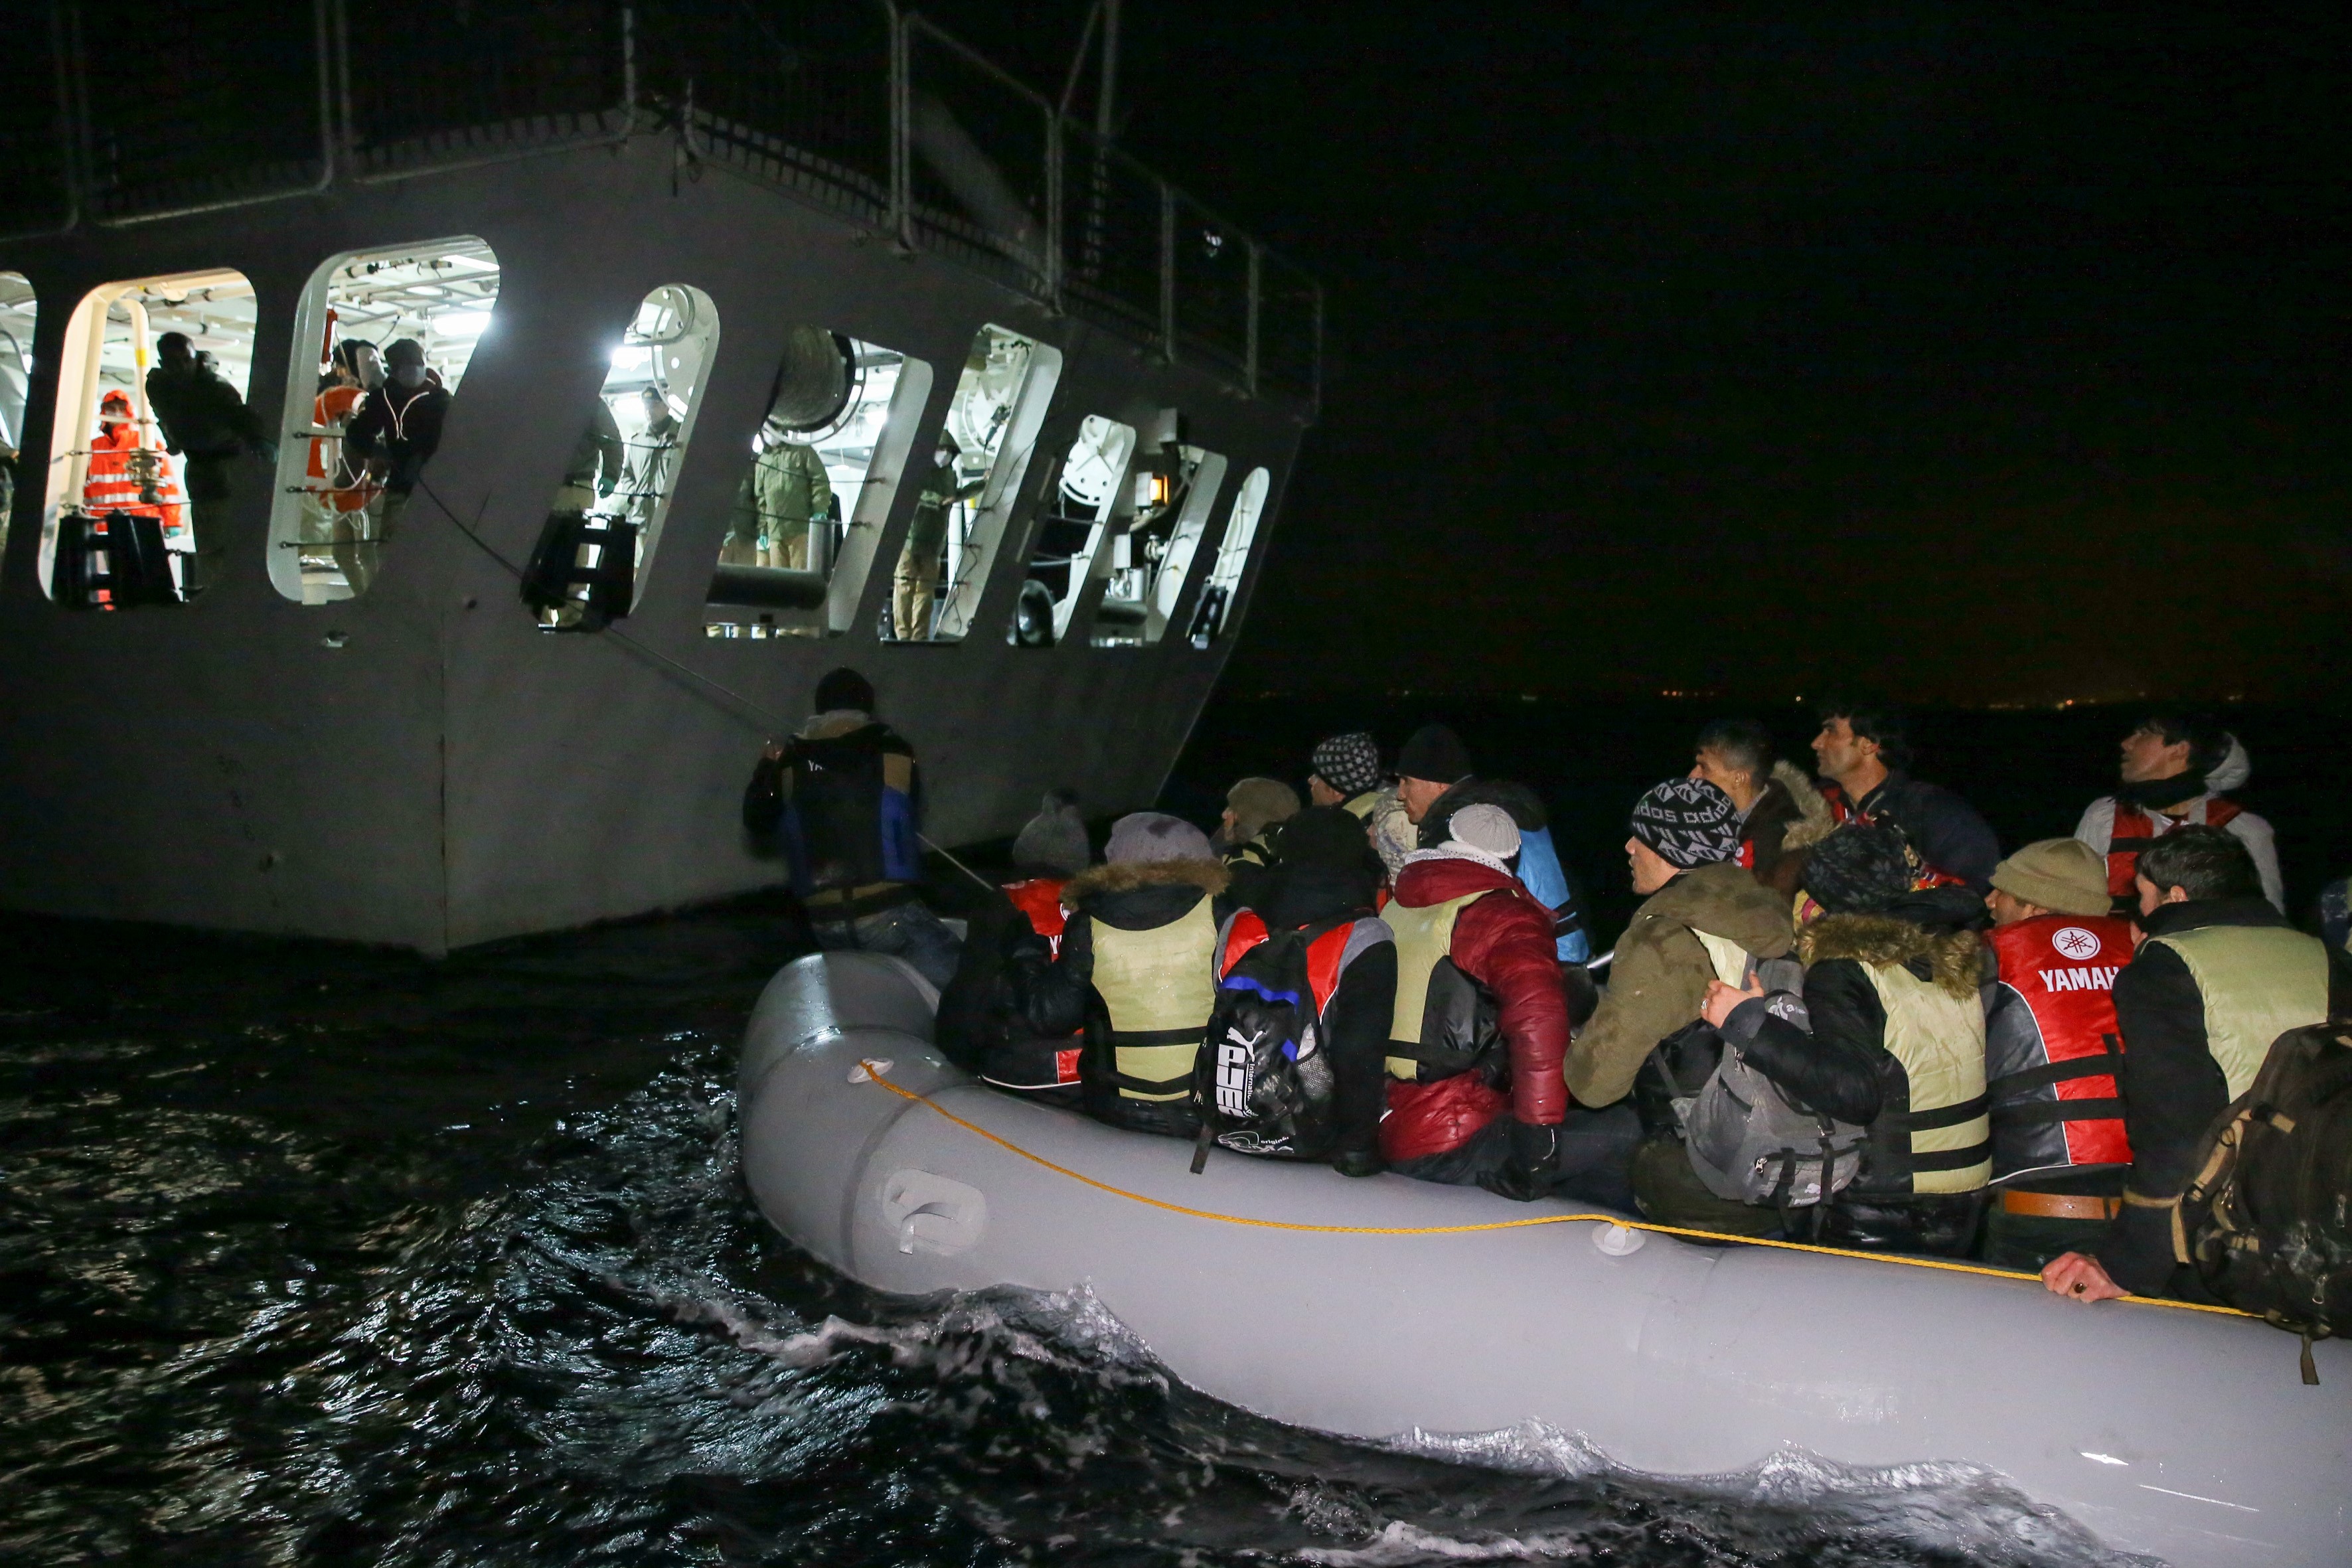 Turkish coast guards pull a refugee boat into a Turkish Coast Guard ship during a rescue operation for the asylum seeker refugees who were illegally trying to reach Greece through the Aegean Sea with a overloaded inflatable boat, on the shores of Turkey's Izmir Province's Cesme District on Jan. 21, 2016. (Anadolu Agency‚Getty Images)